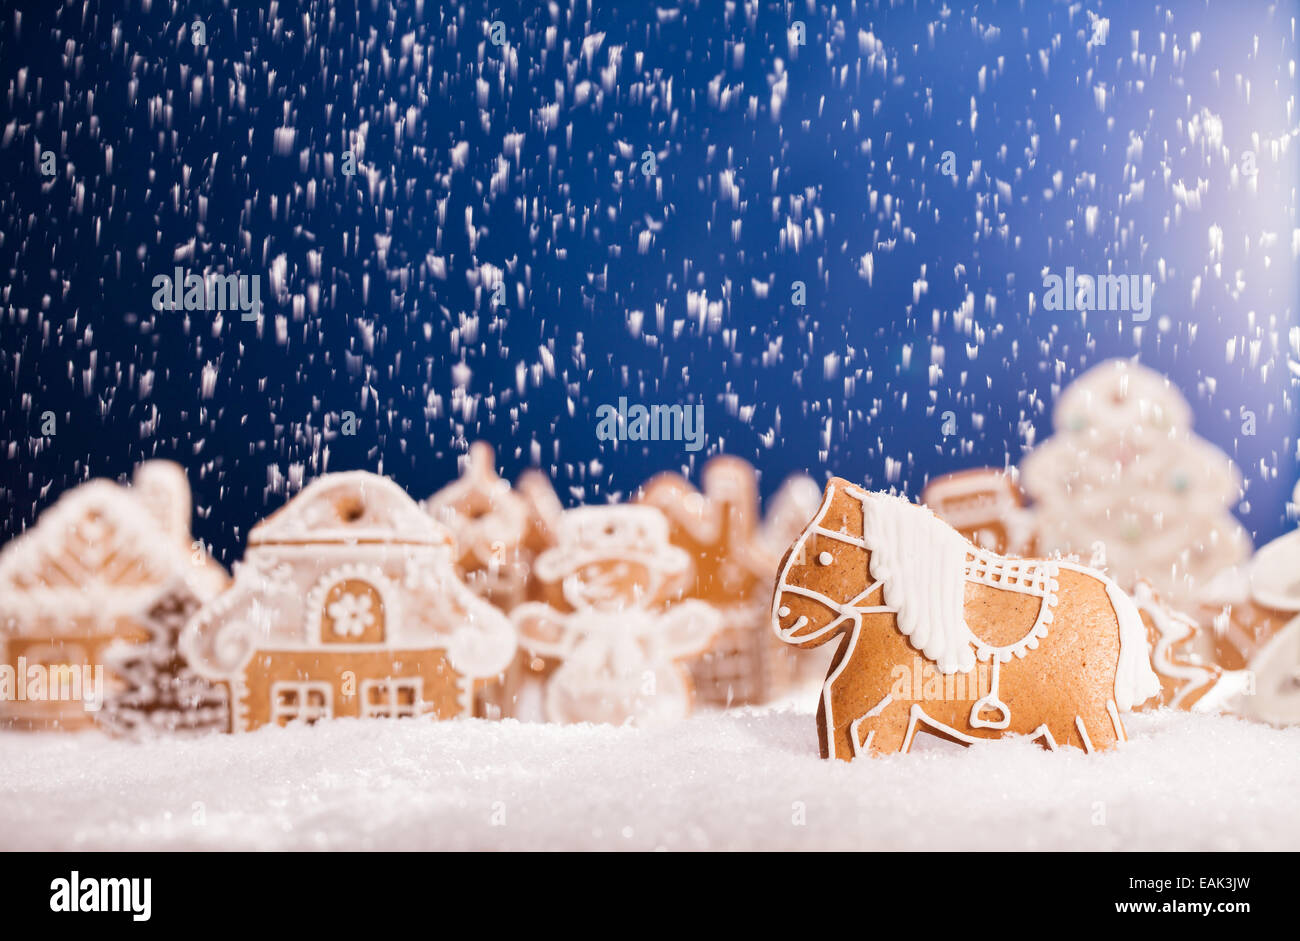 Macro photo of gingerbread village with falling snow Stock Photo